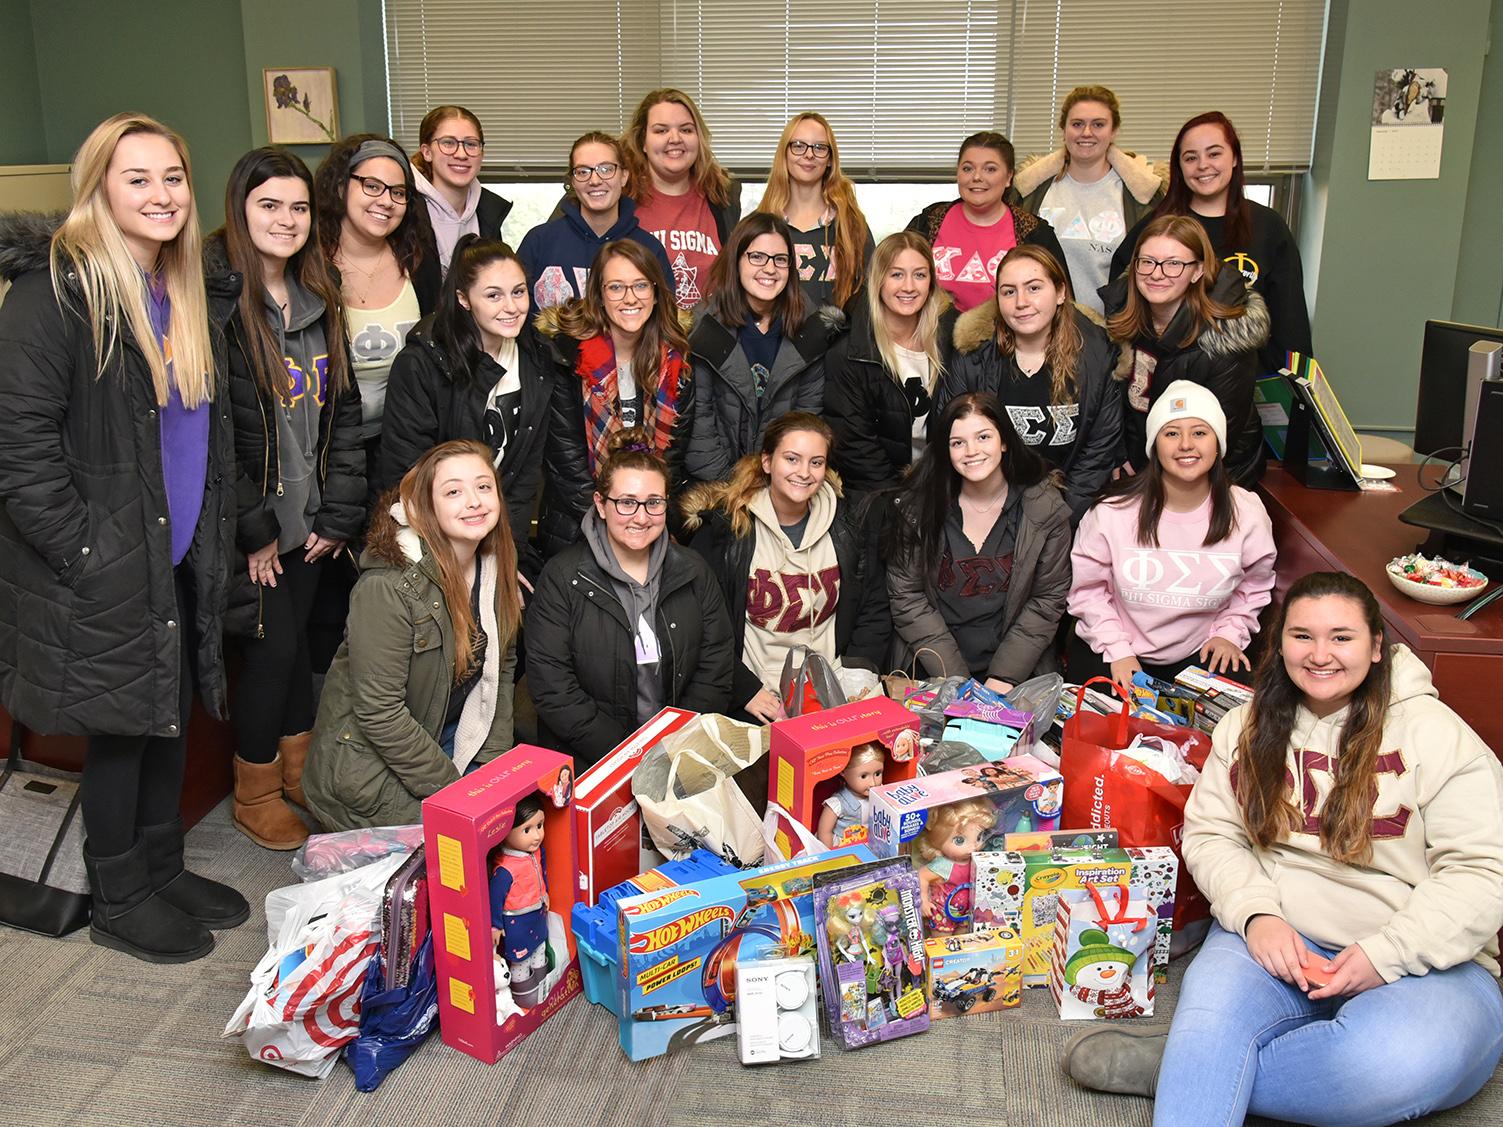 Sororities collected gifts and canned goods for the community